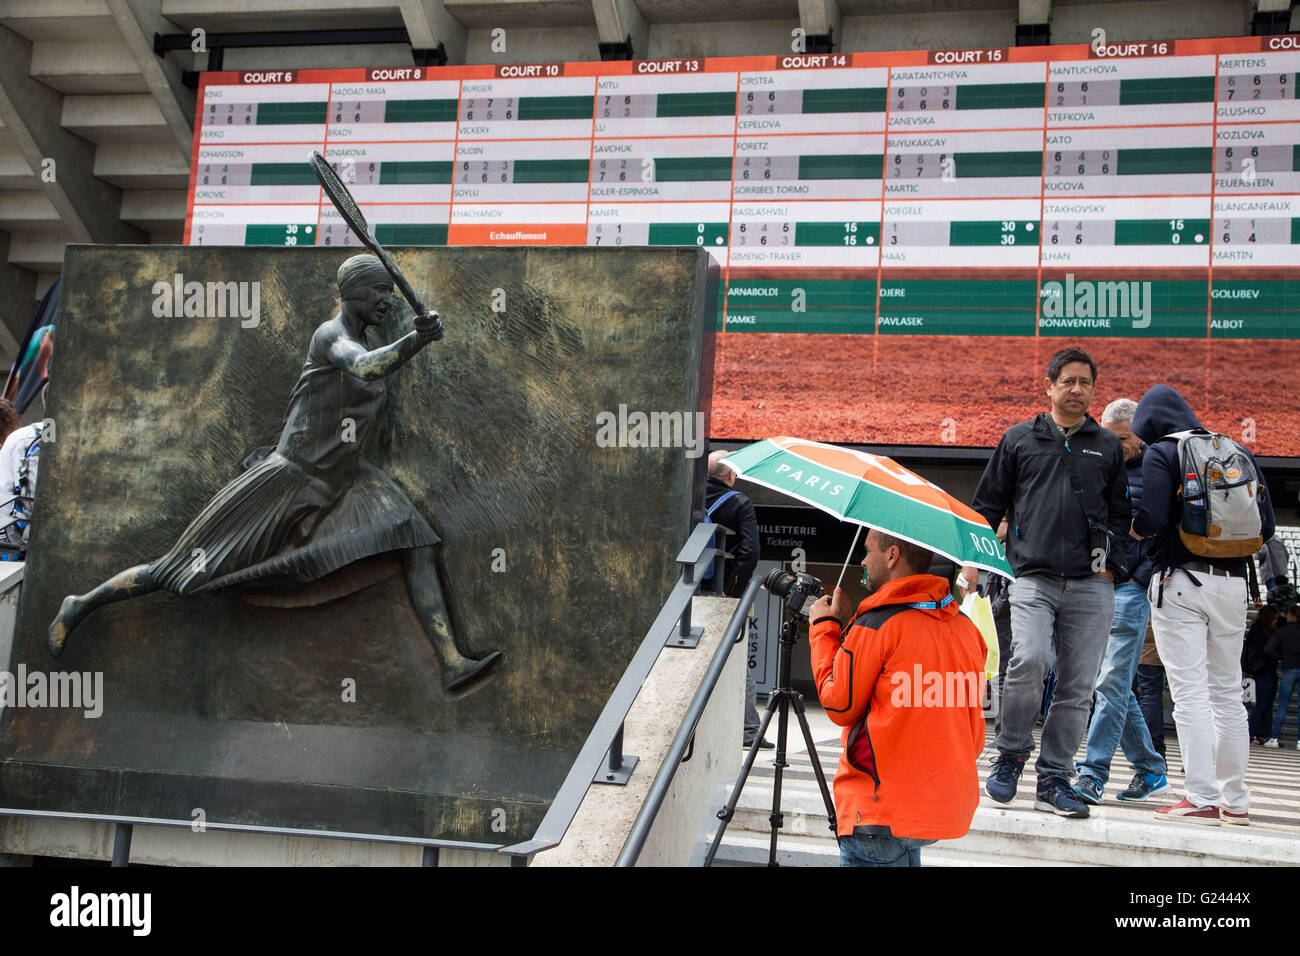 Time Lapse photographer photographing a scene at Roland Garros 2016 French Open Tennis Tournament, Paris, France Stock Photo